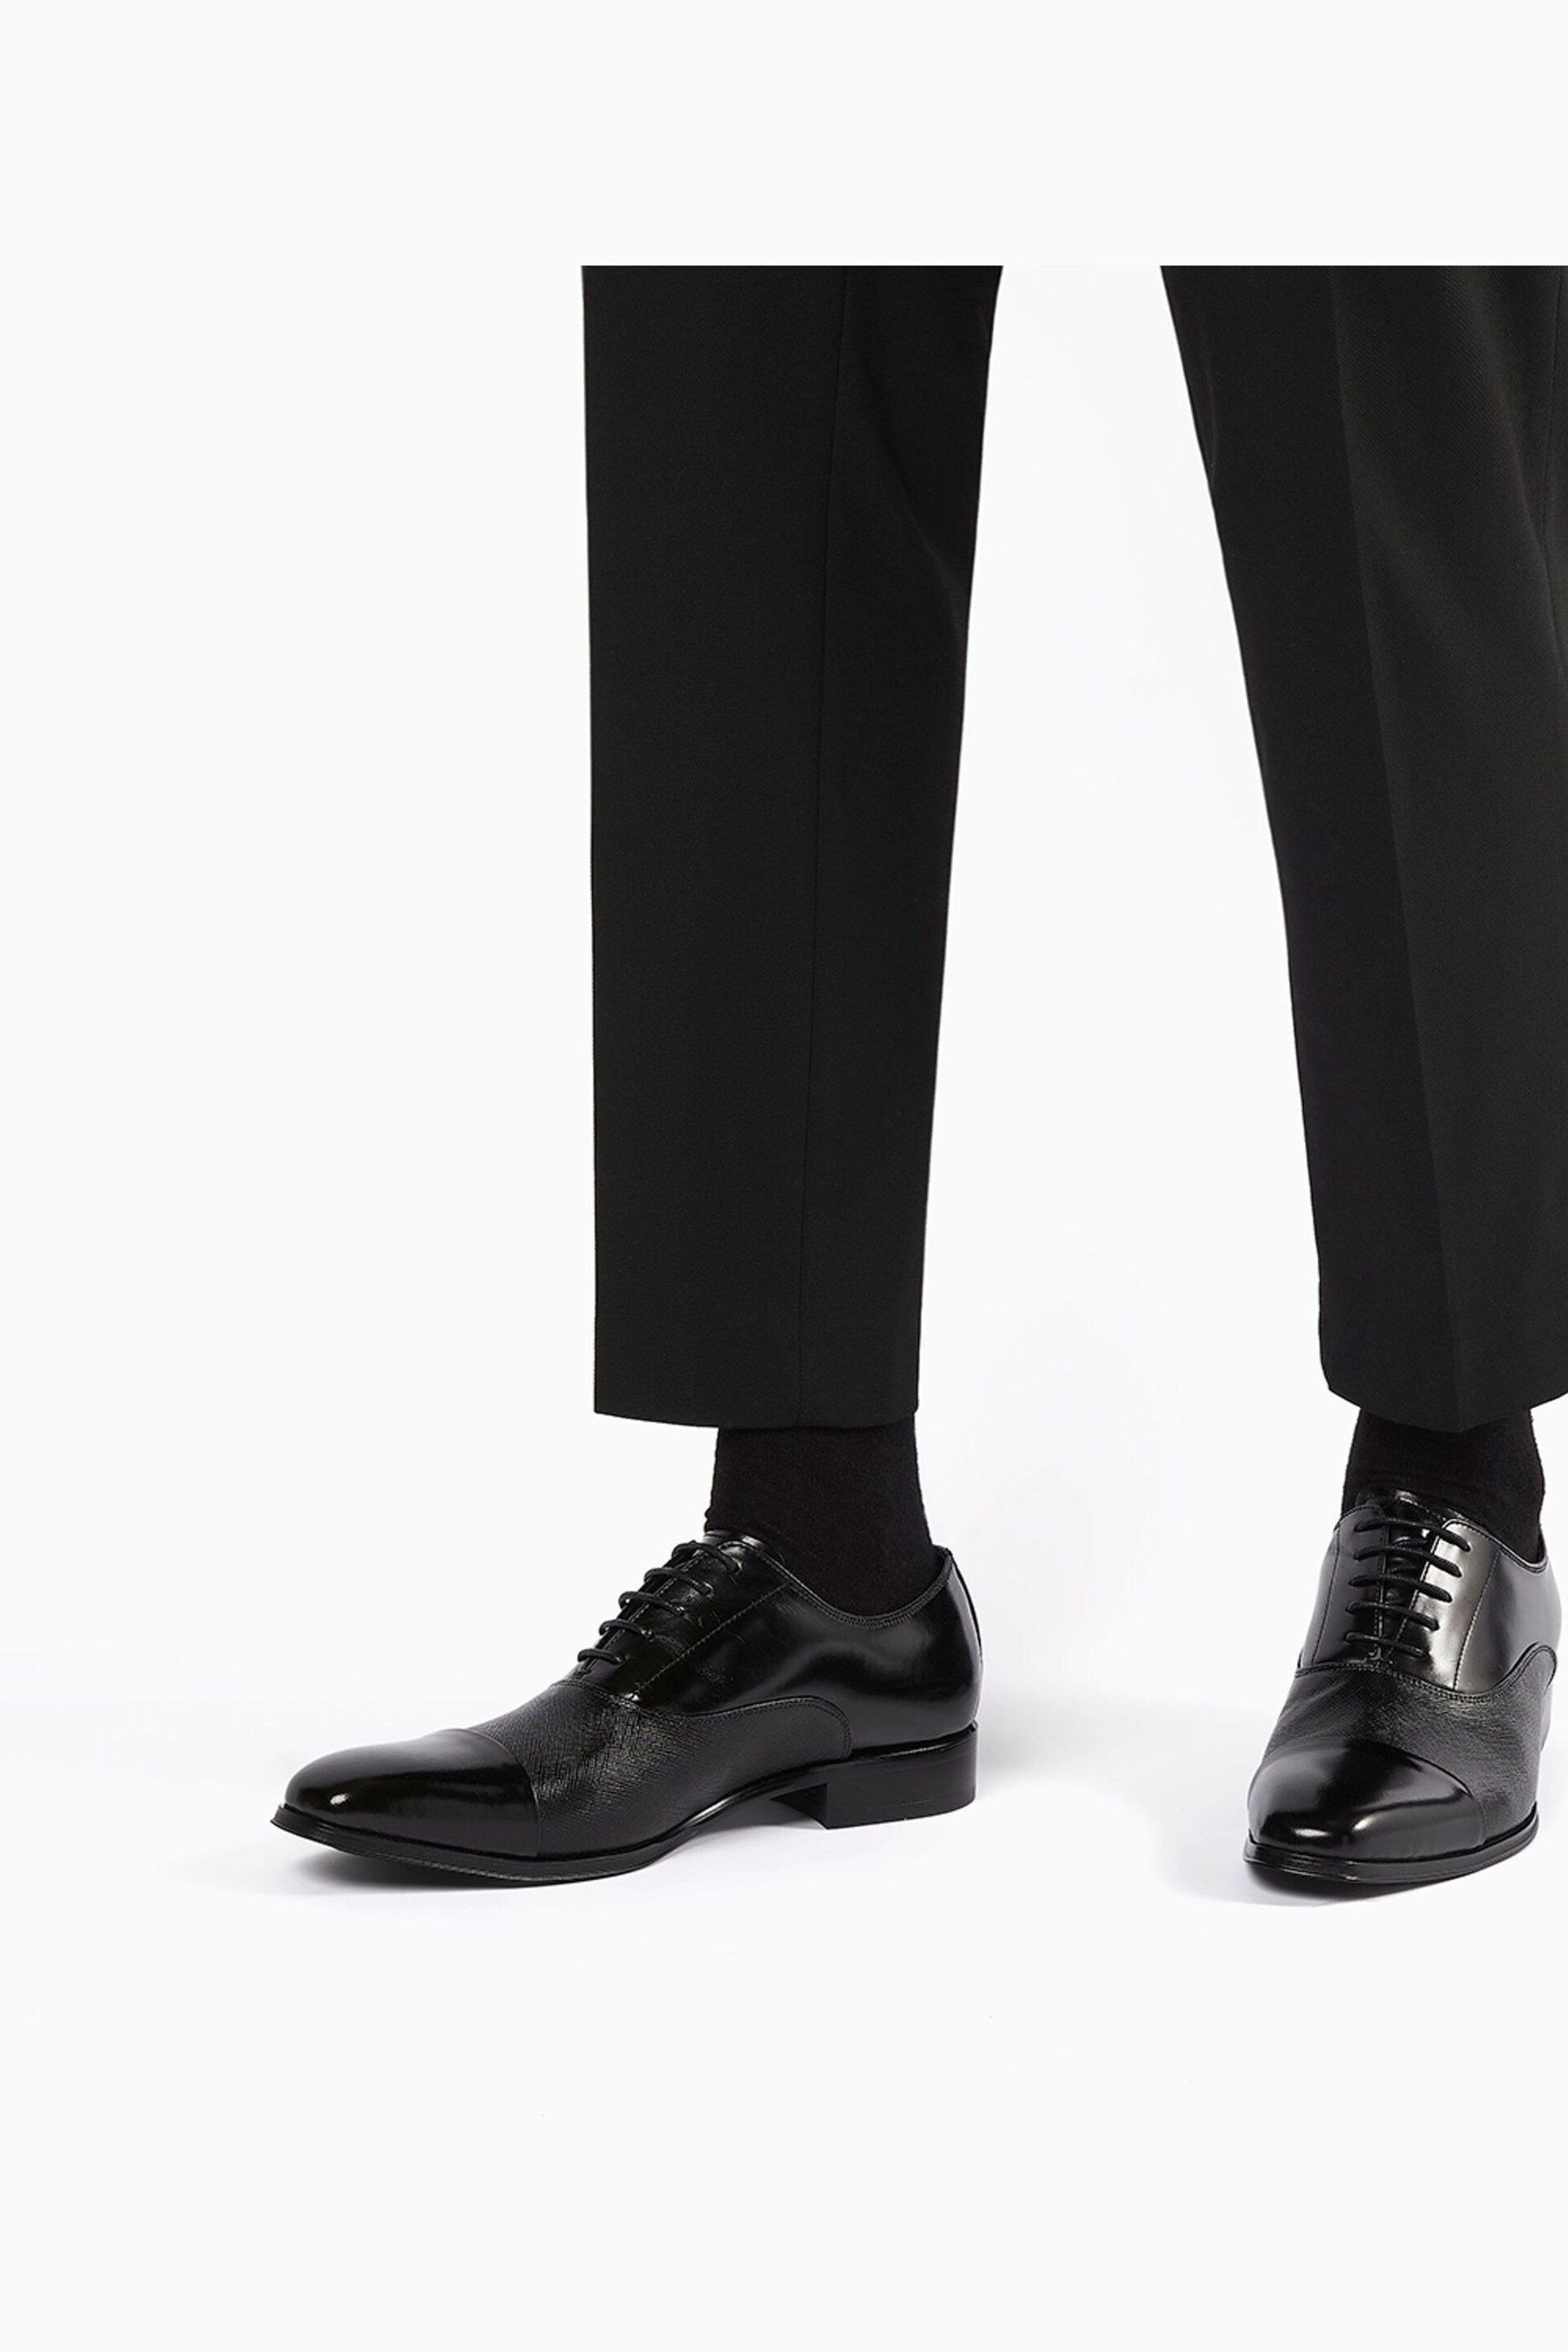 Dune London Black Sheet Saffiano Embossed Oxford Shoes - Image 2 of 5